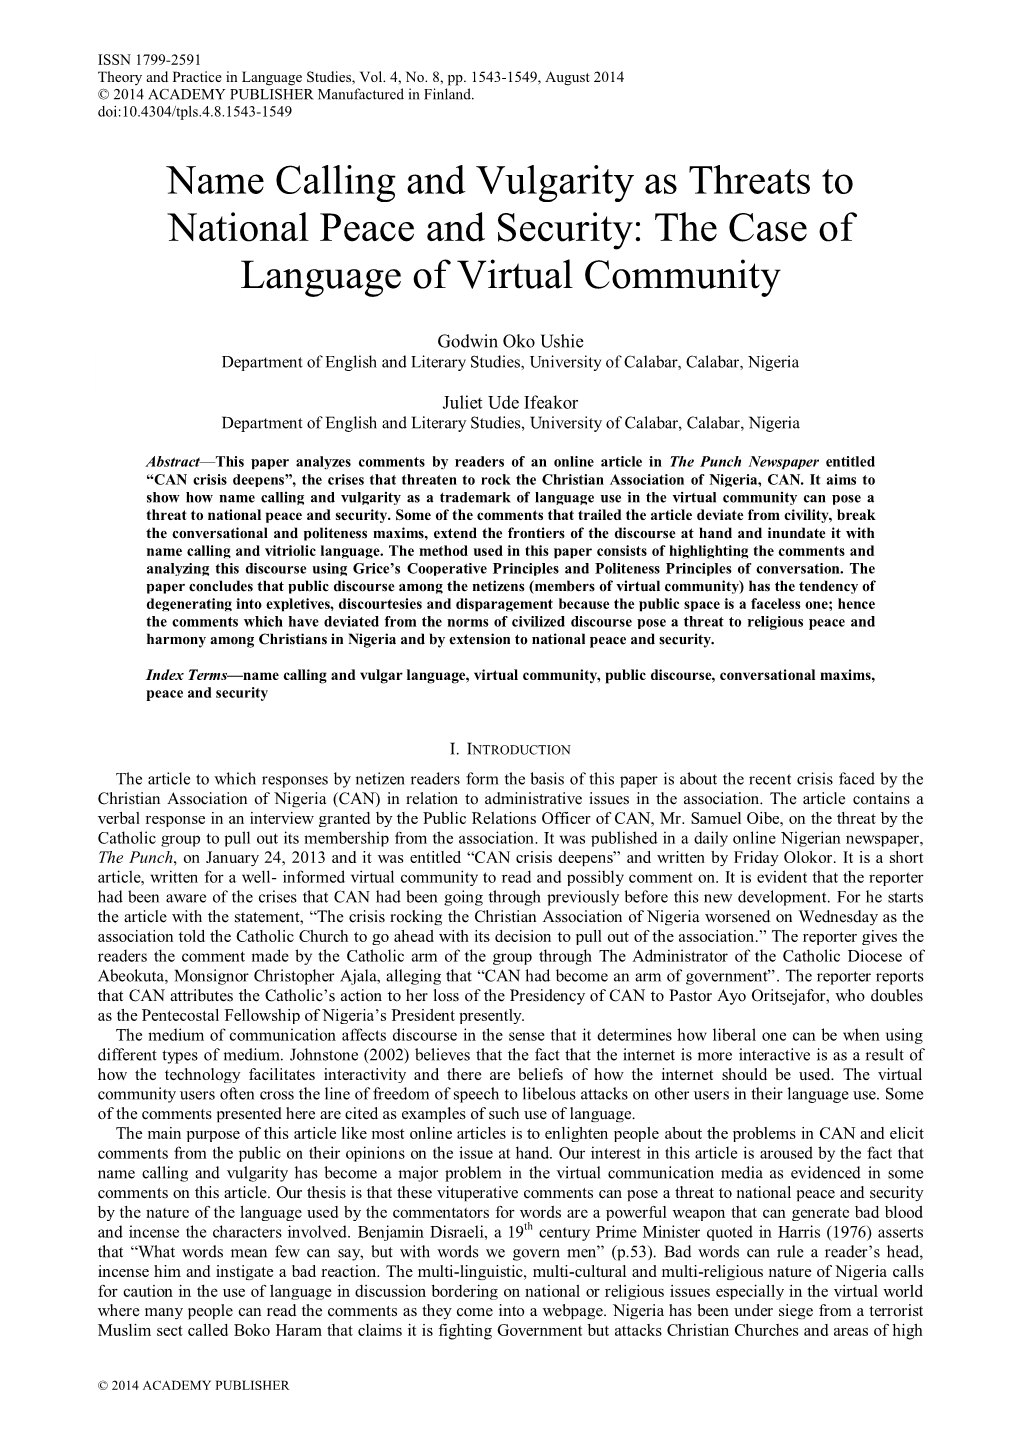 Name Calling and Vulgarity As Threats to National Peace and Security: the Case of Language of Virtual Community